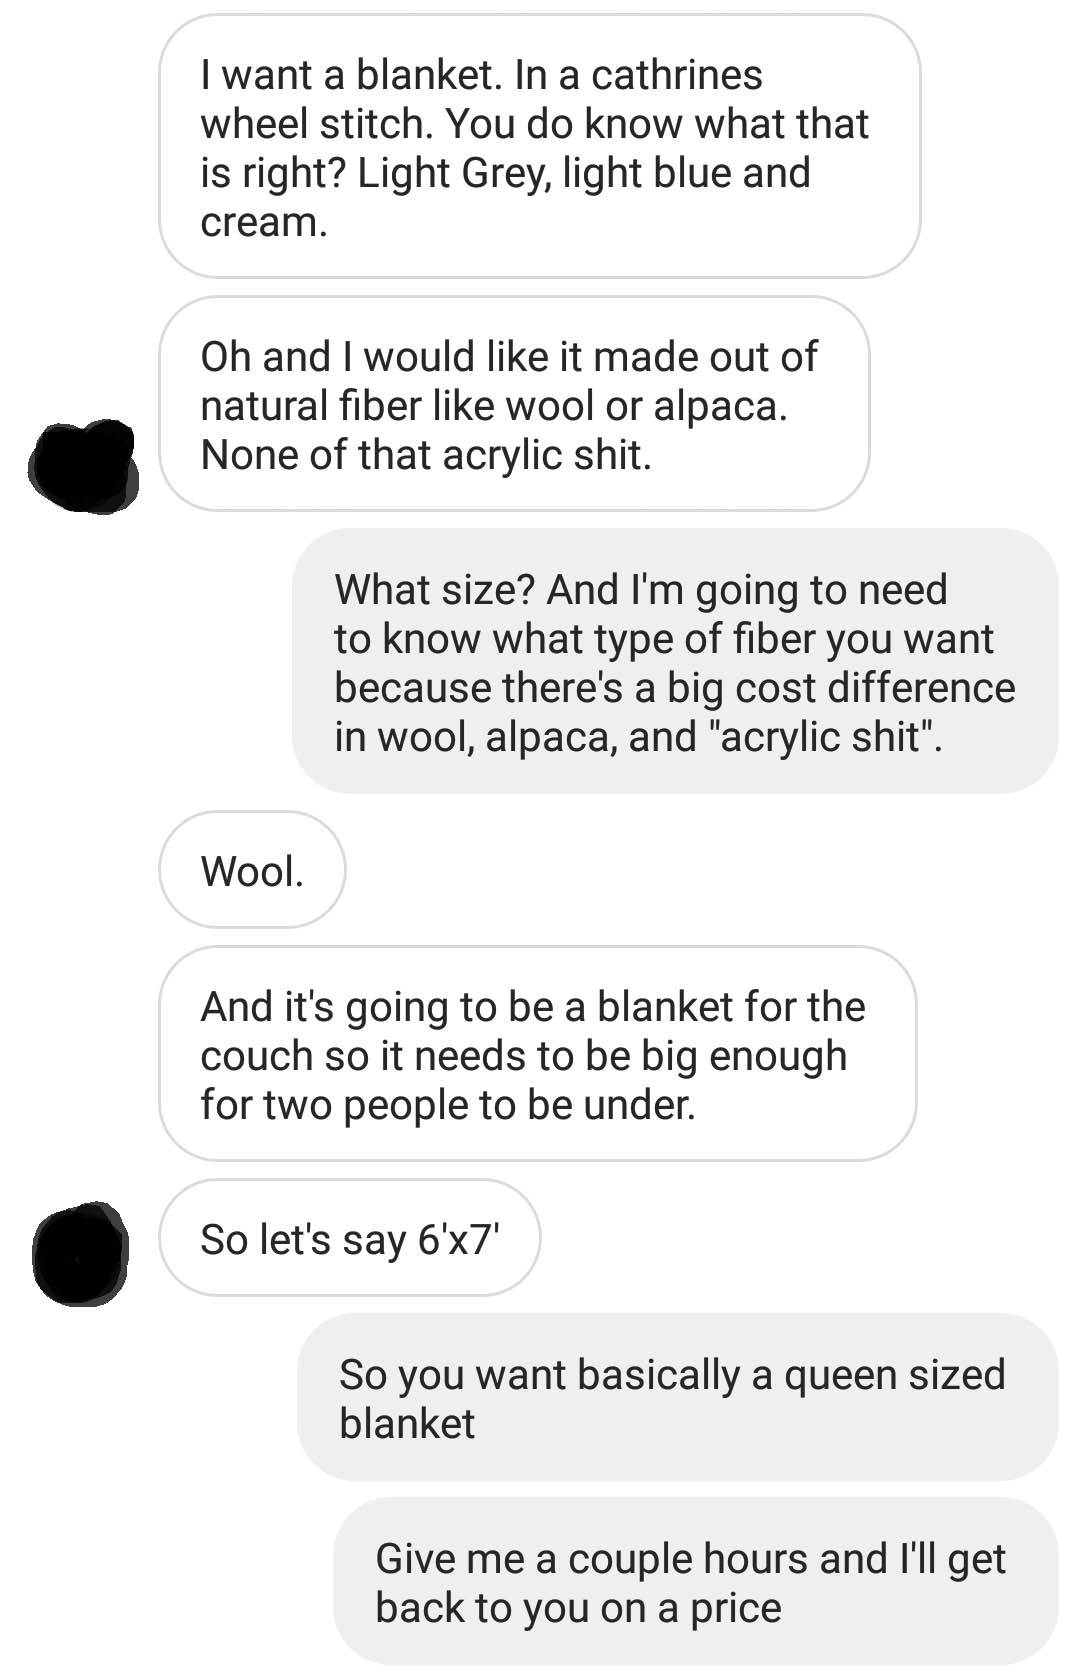 Blanket Maker Shares Texts from the Most Entitled "Customer" Ever